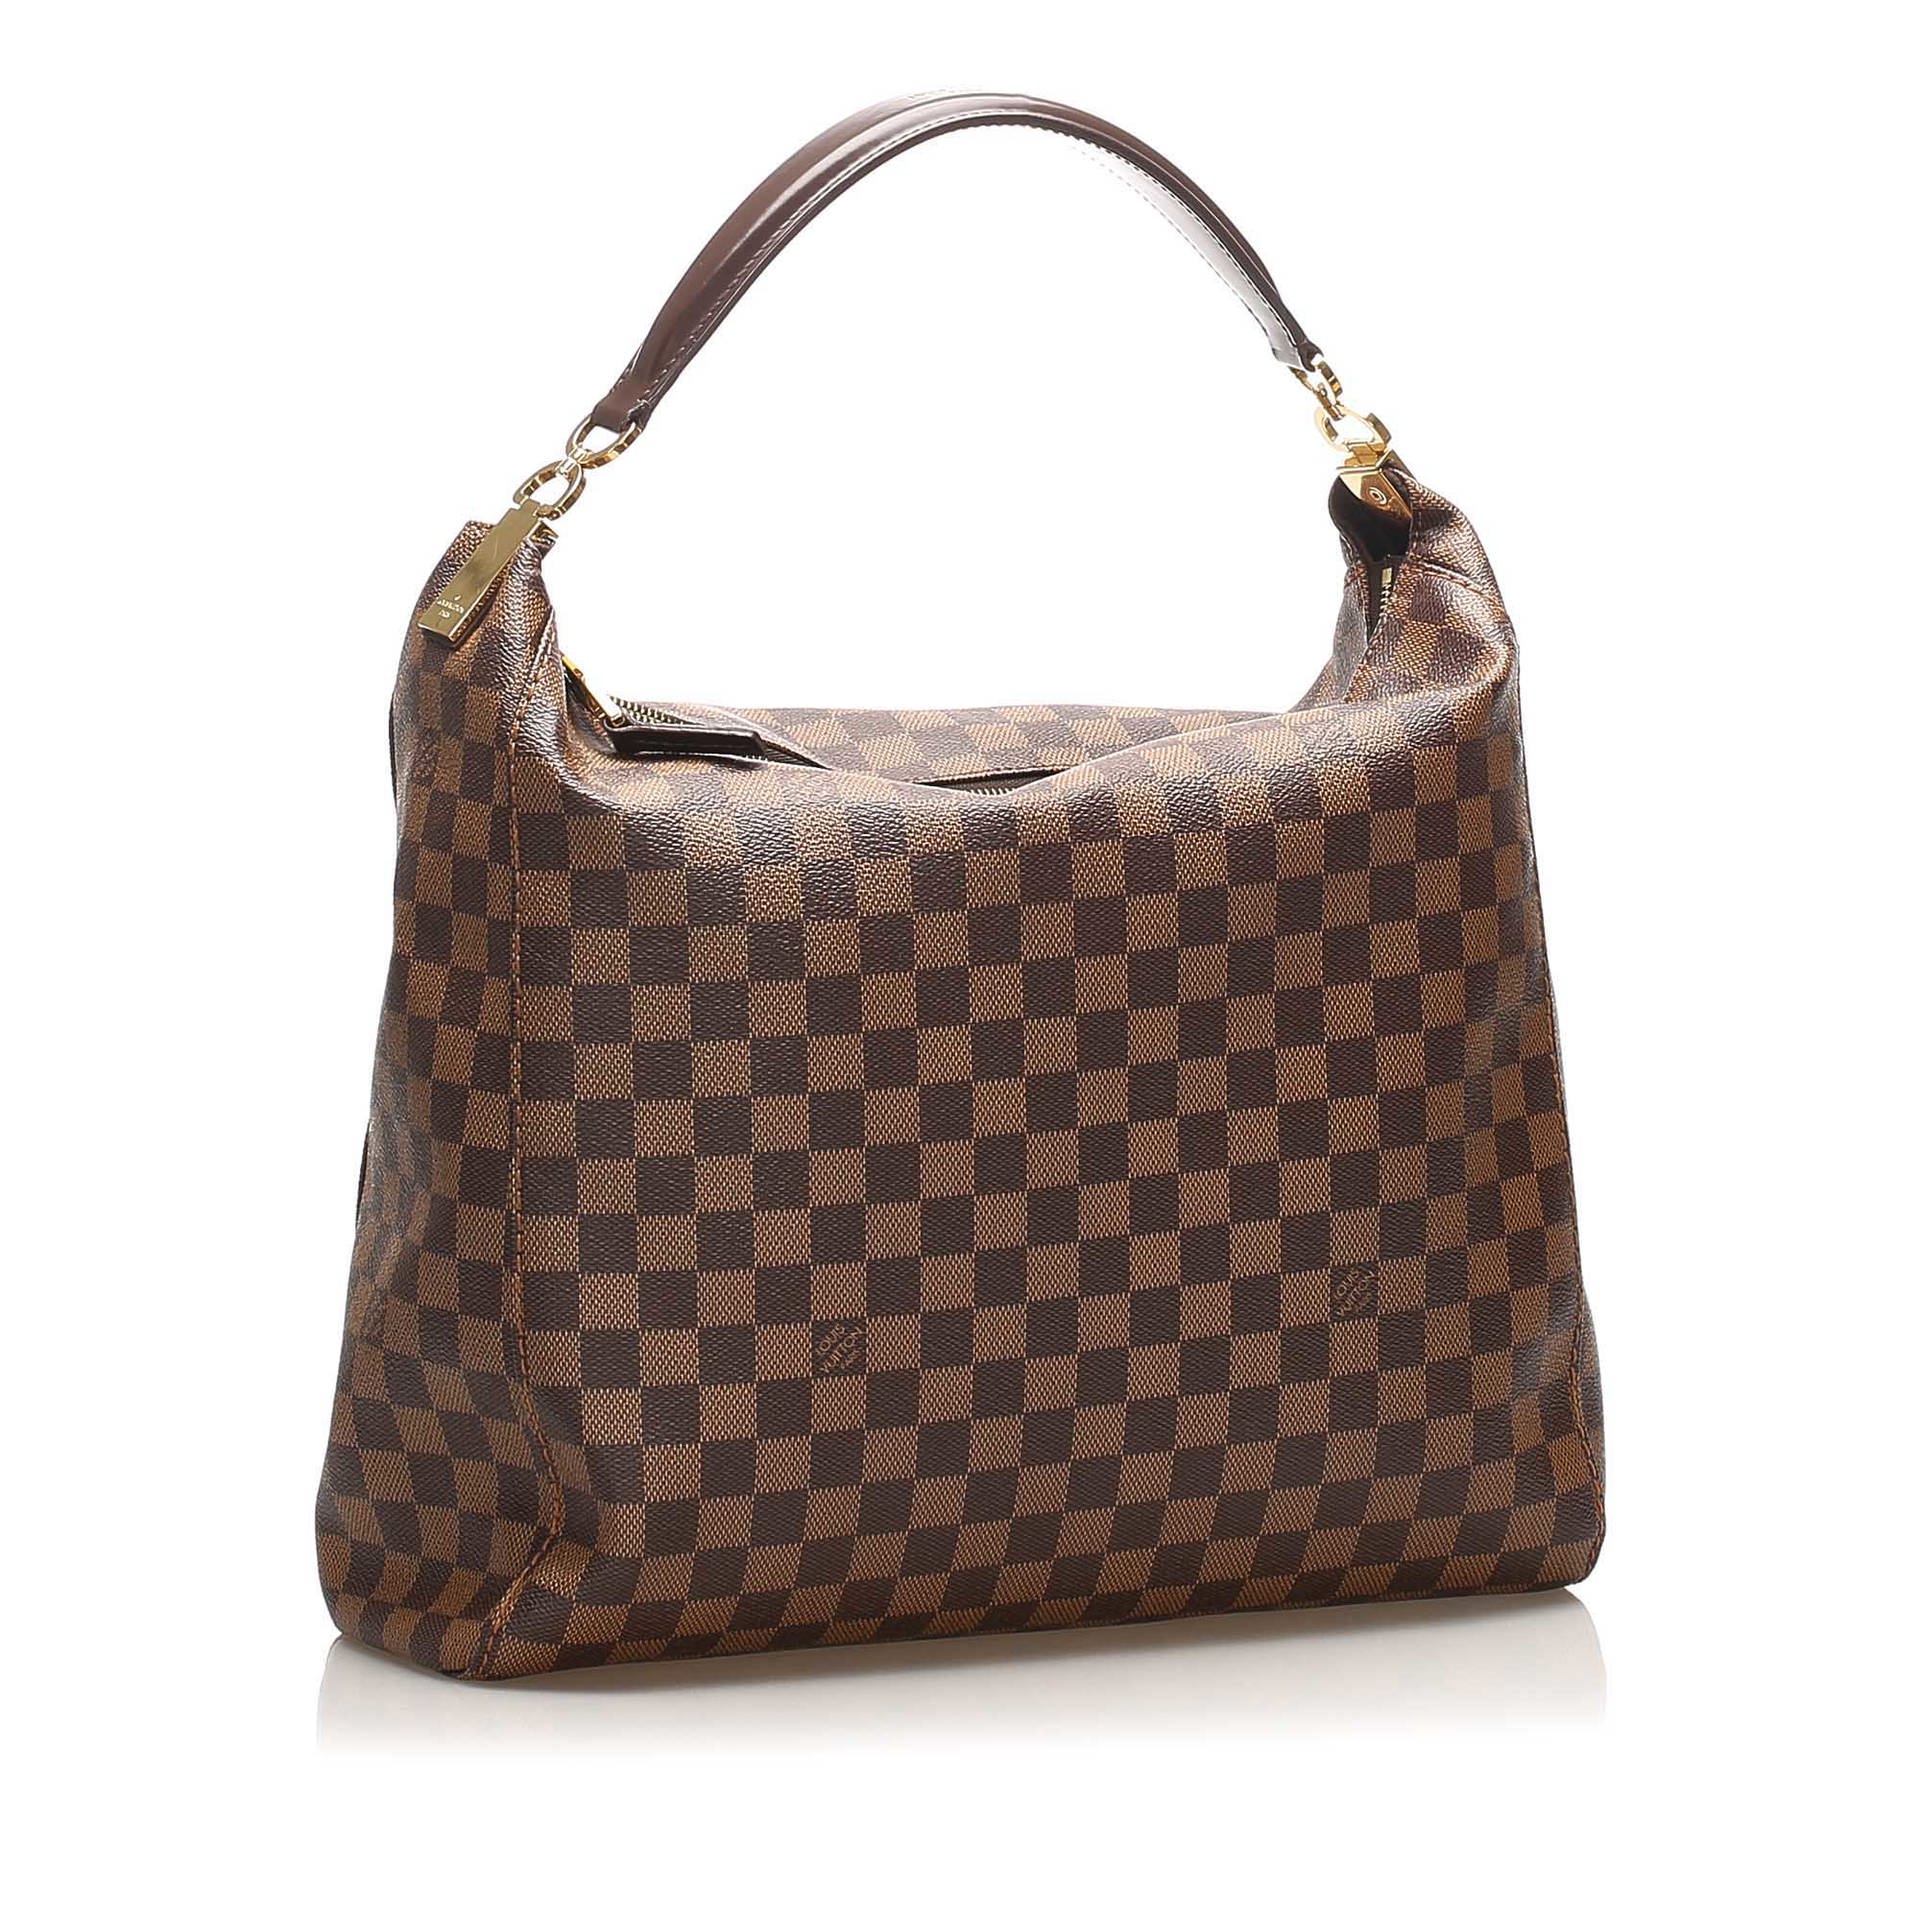 What Is Employee Discount At Louis Vuitton